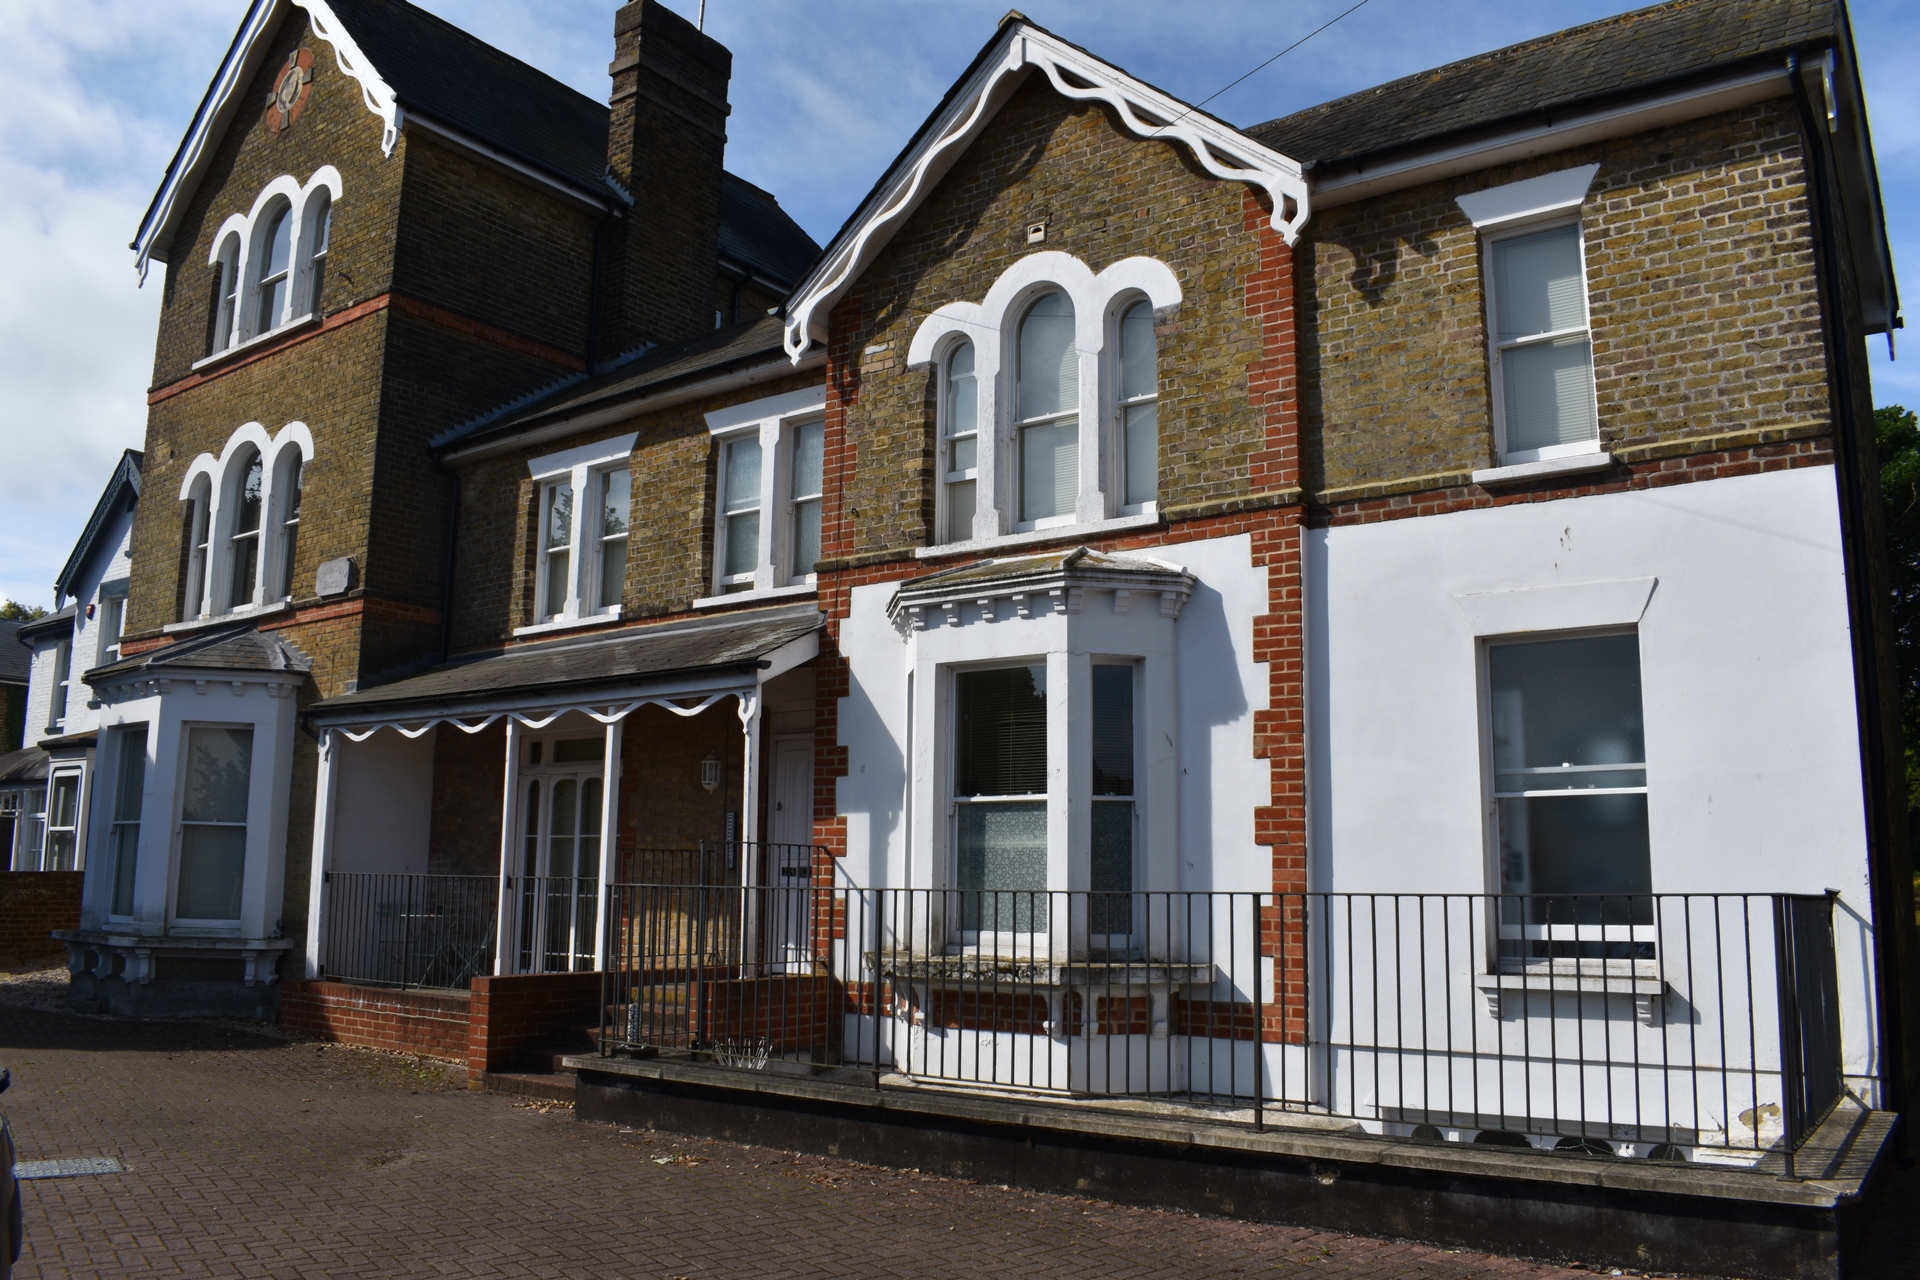 This spacious, beautifully appointed 1-bedroom duplex apartment is situated within a charming period style property located in Broadstairs.